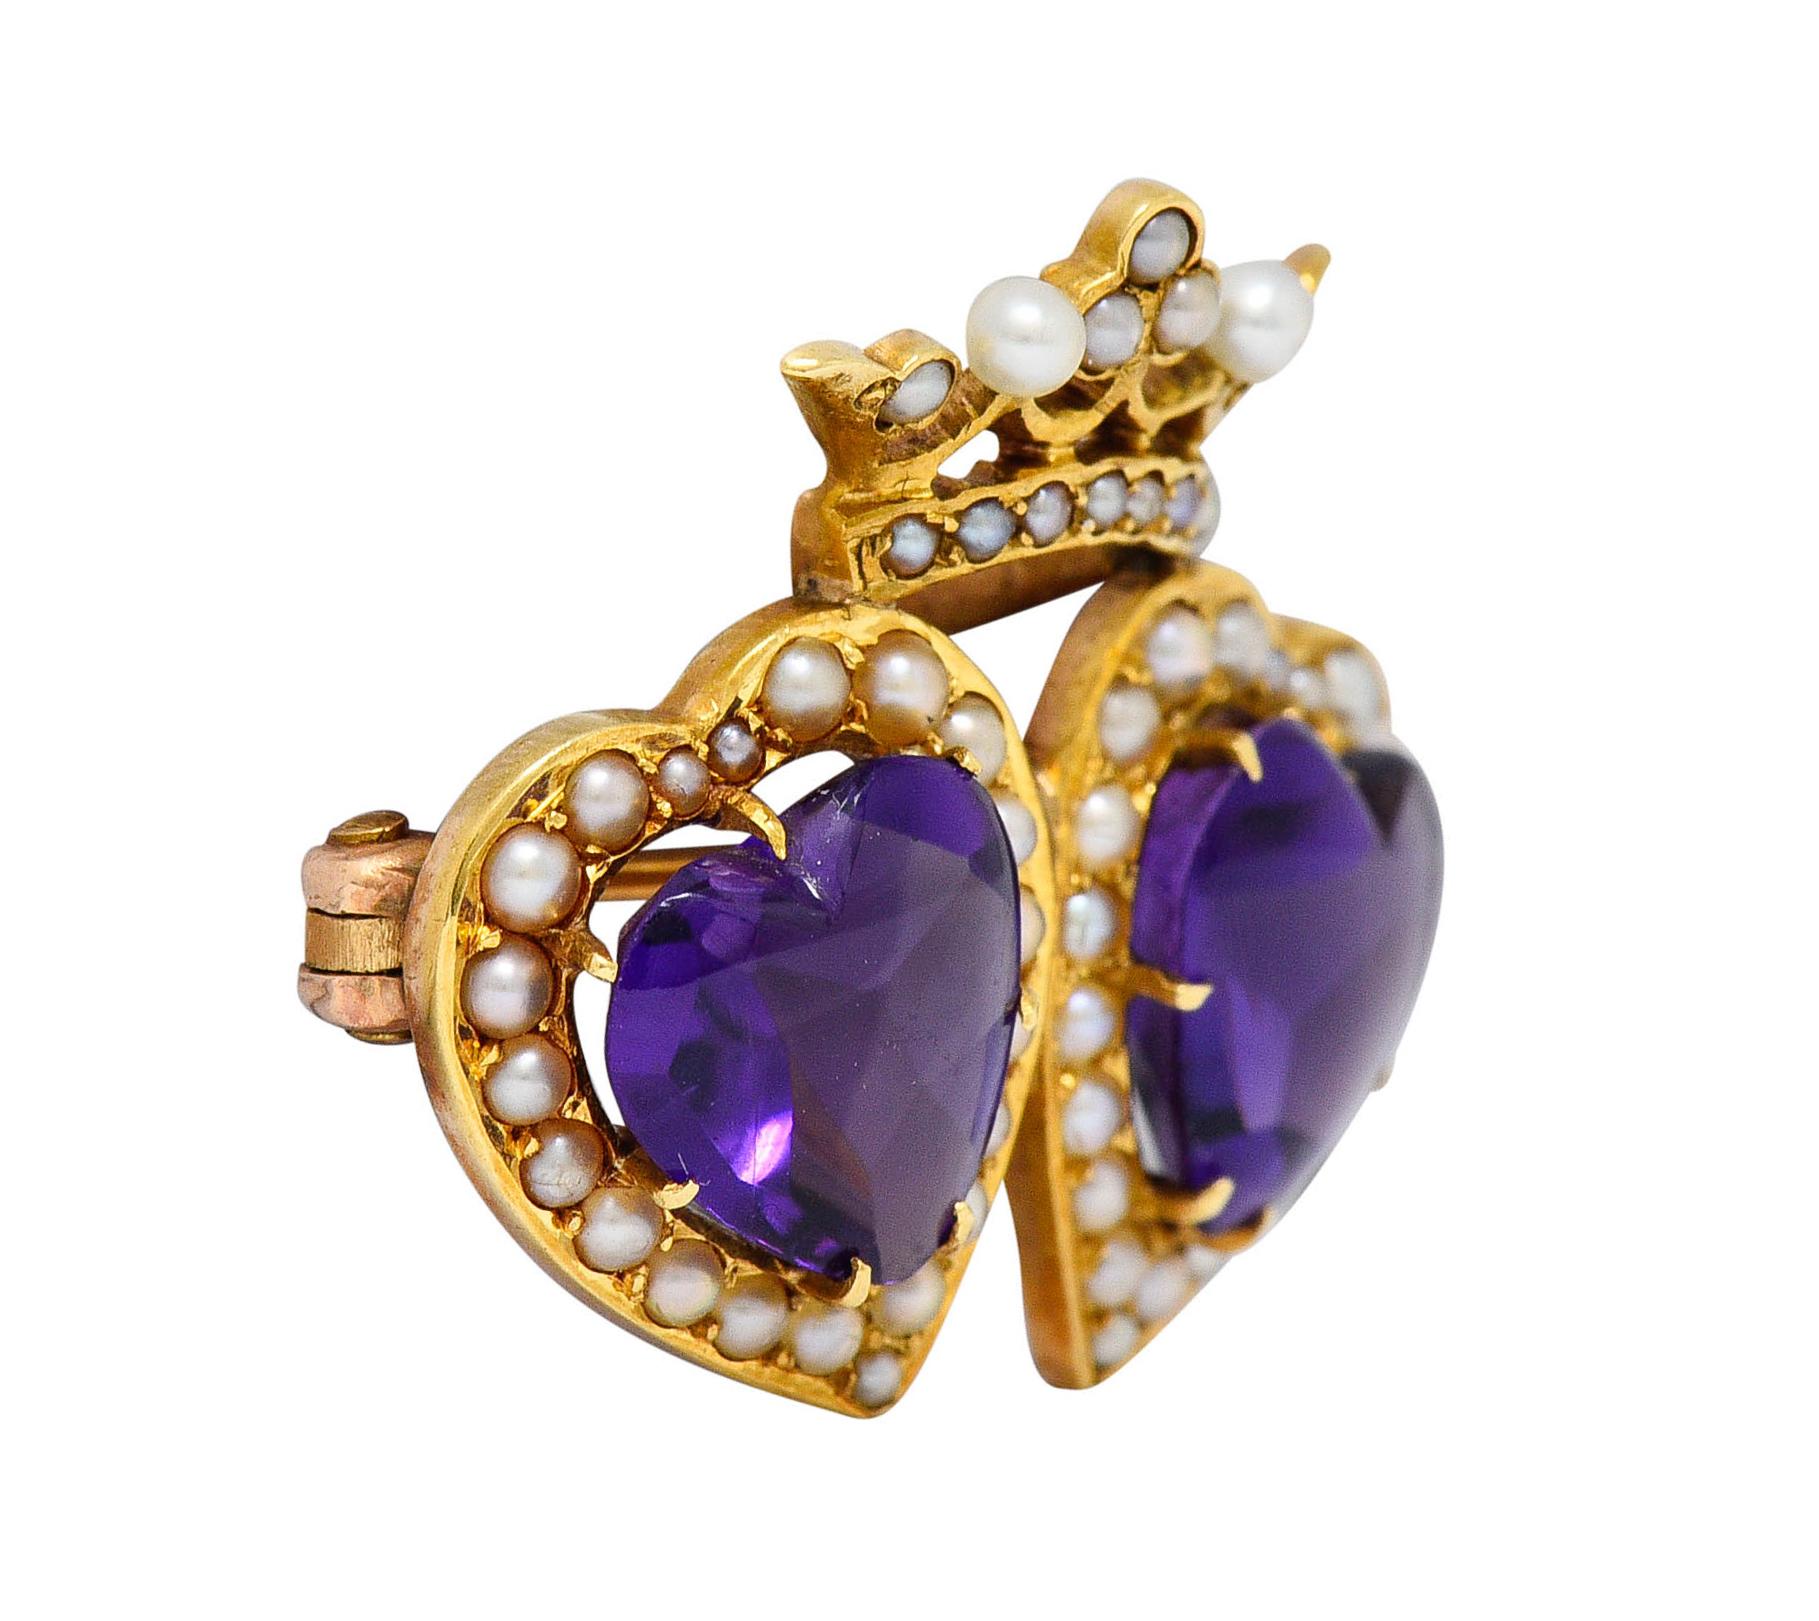 Petite brooch is designed as two hearts topped by a crown

Featuring two amethyst heart cabochons, richly purple, and measuring approximately 8.2 x 8.5 mm

Accented throughout by freshwater natural pearls - well matched with good luster

Completed